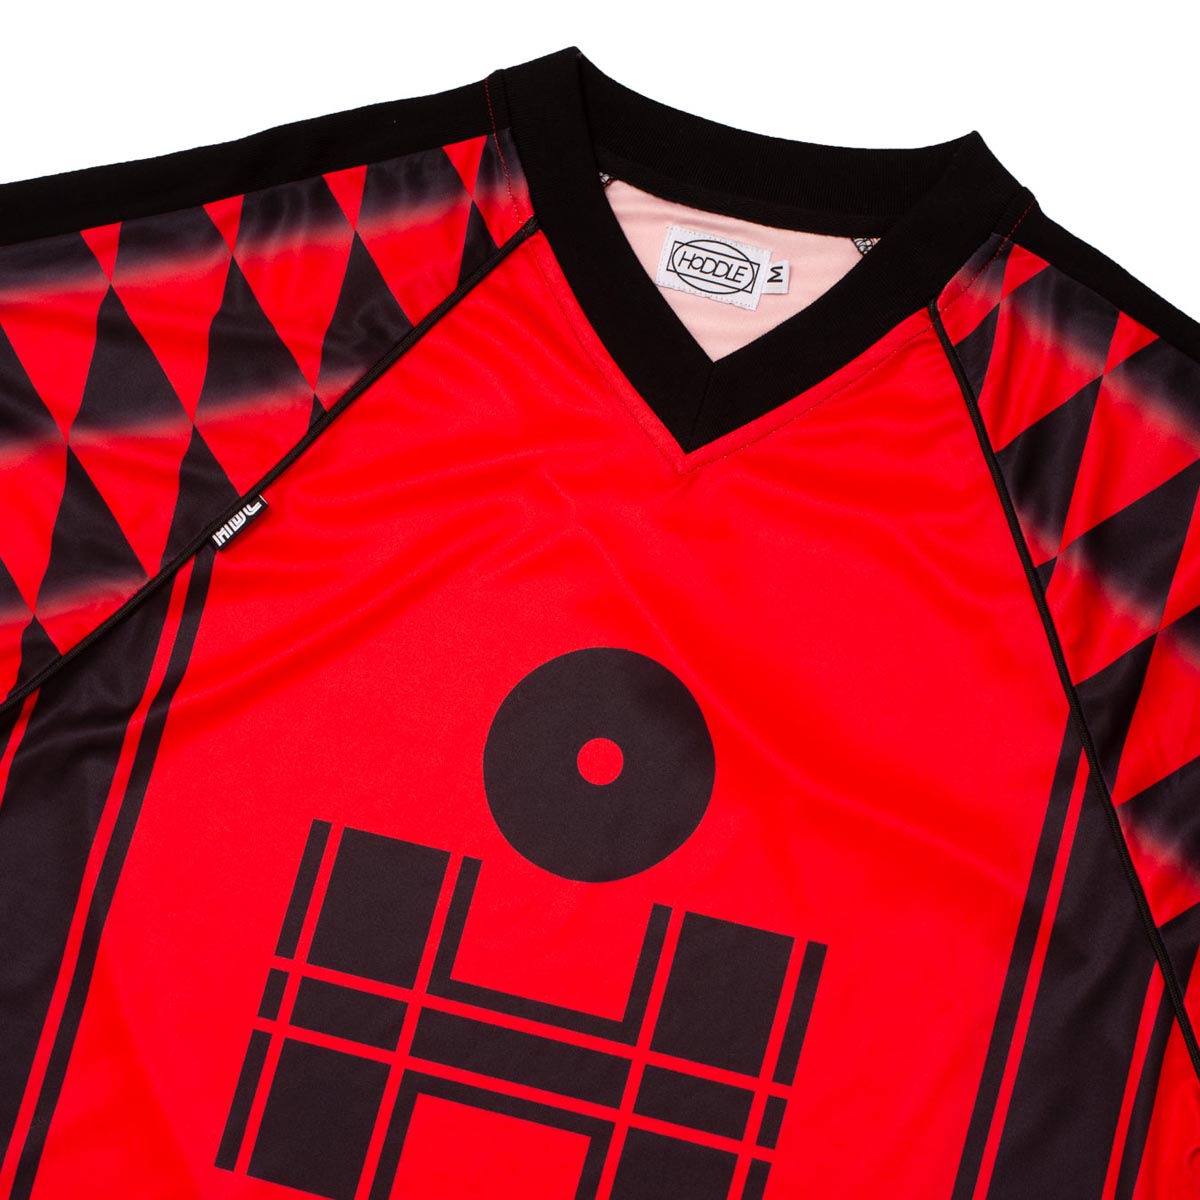 Hoddle Football Jersey - Red/Black image 3